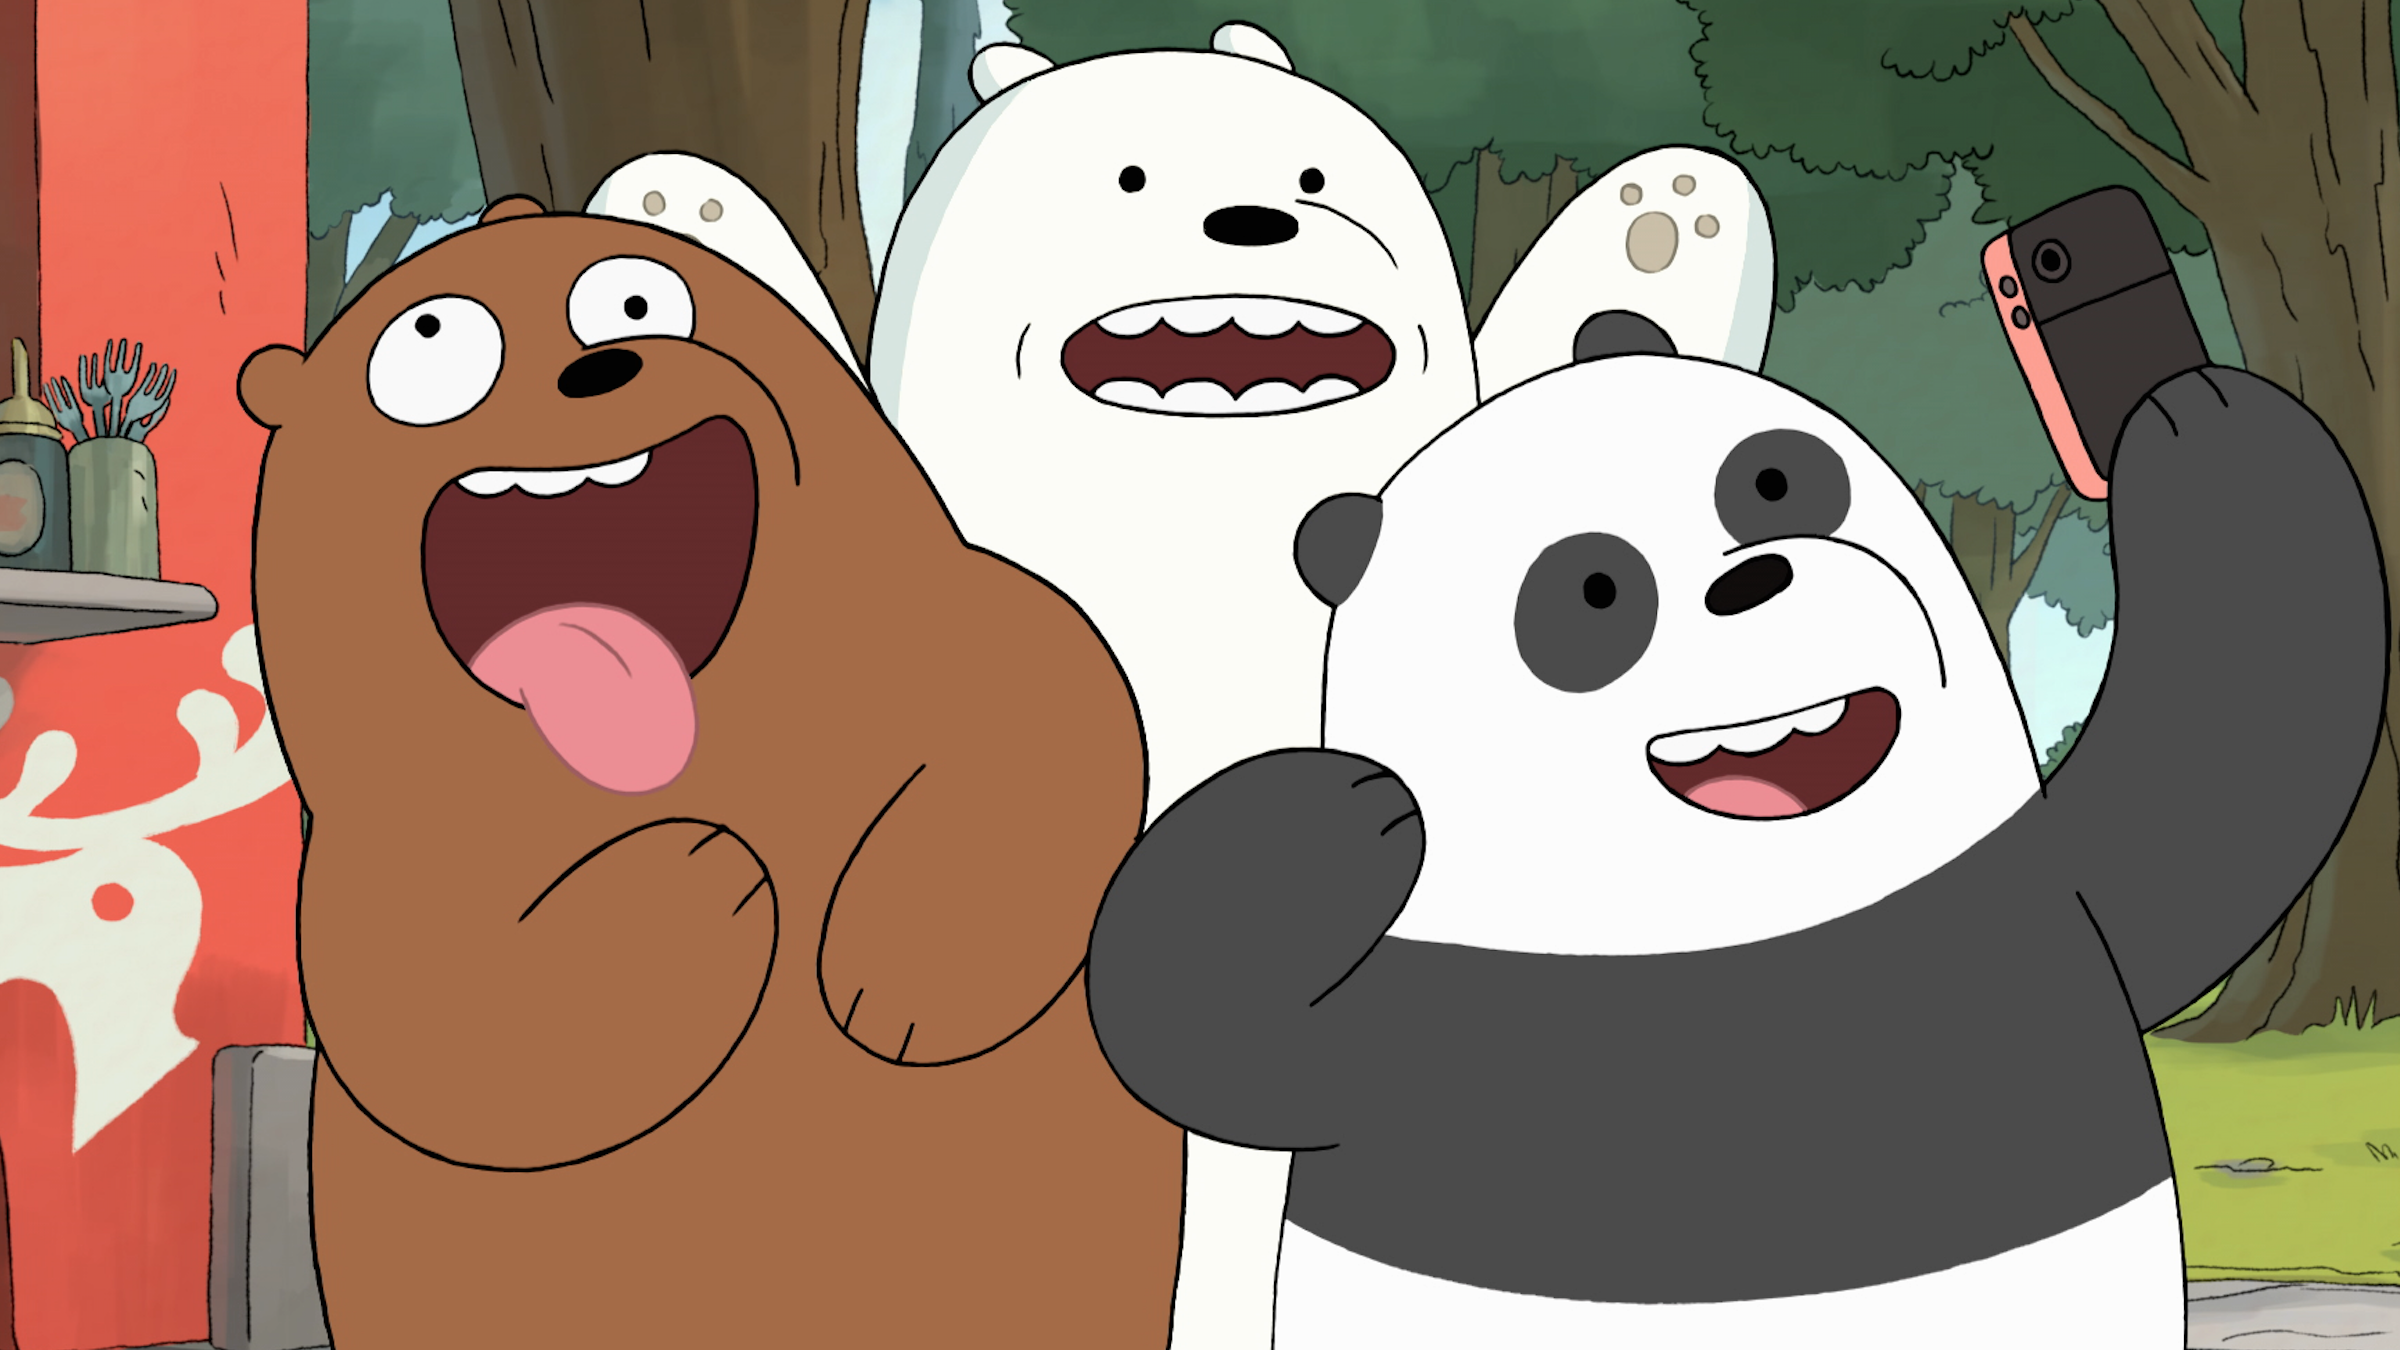 We Bare Bears The Movie Reminds Us Of The Series' True Message | Den of Geek